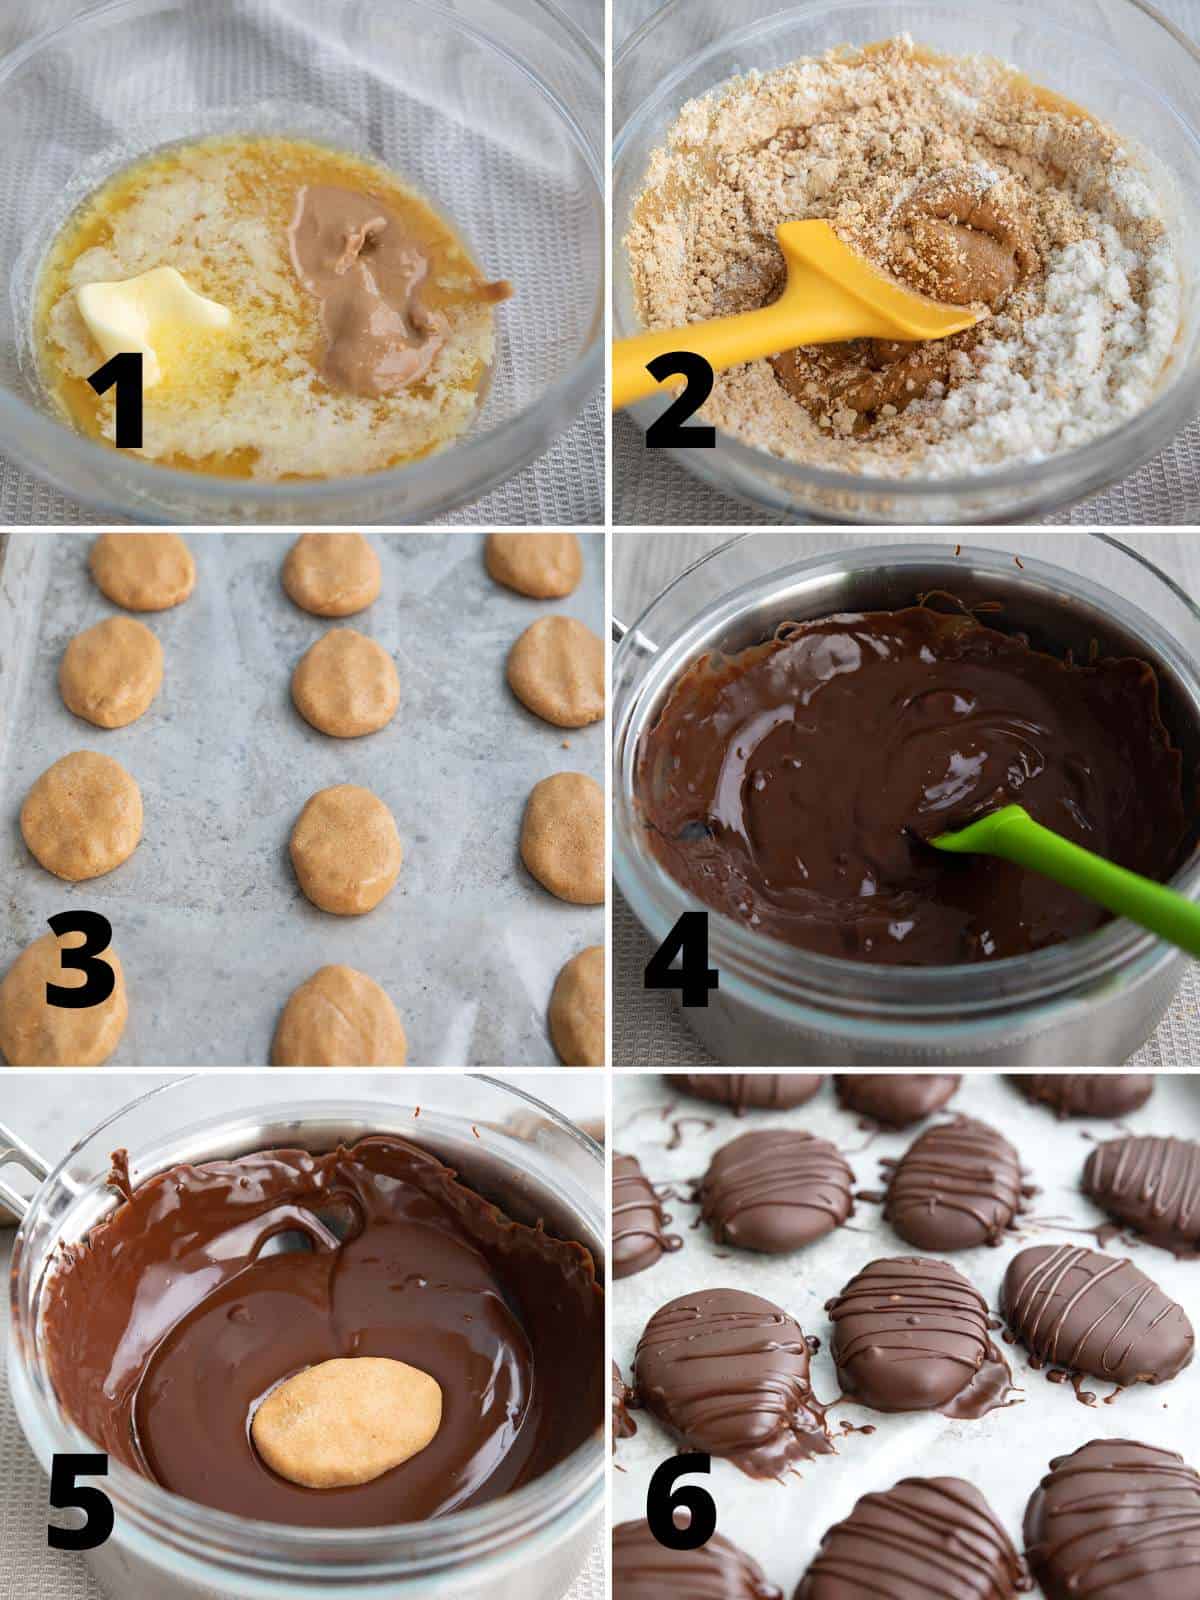 A collage of 6 images showing how to make Keto Peanut Butter Eggs.